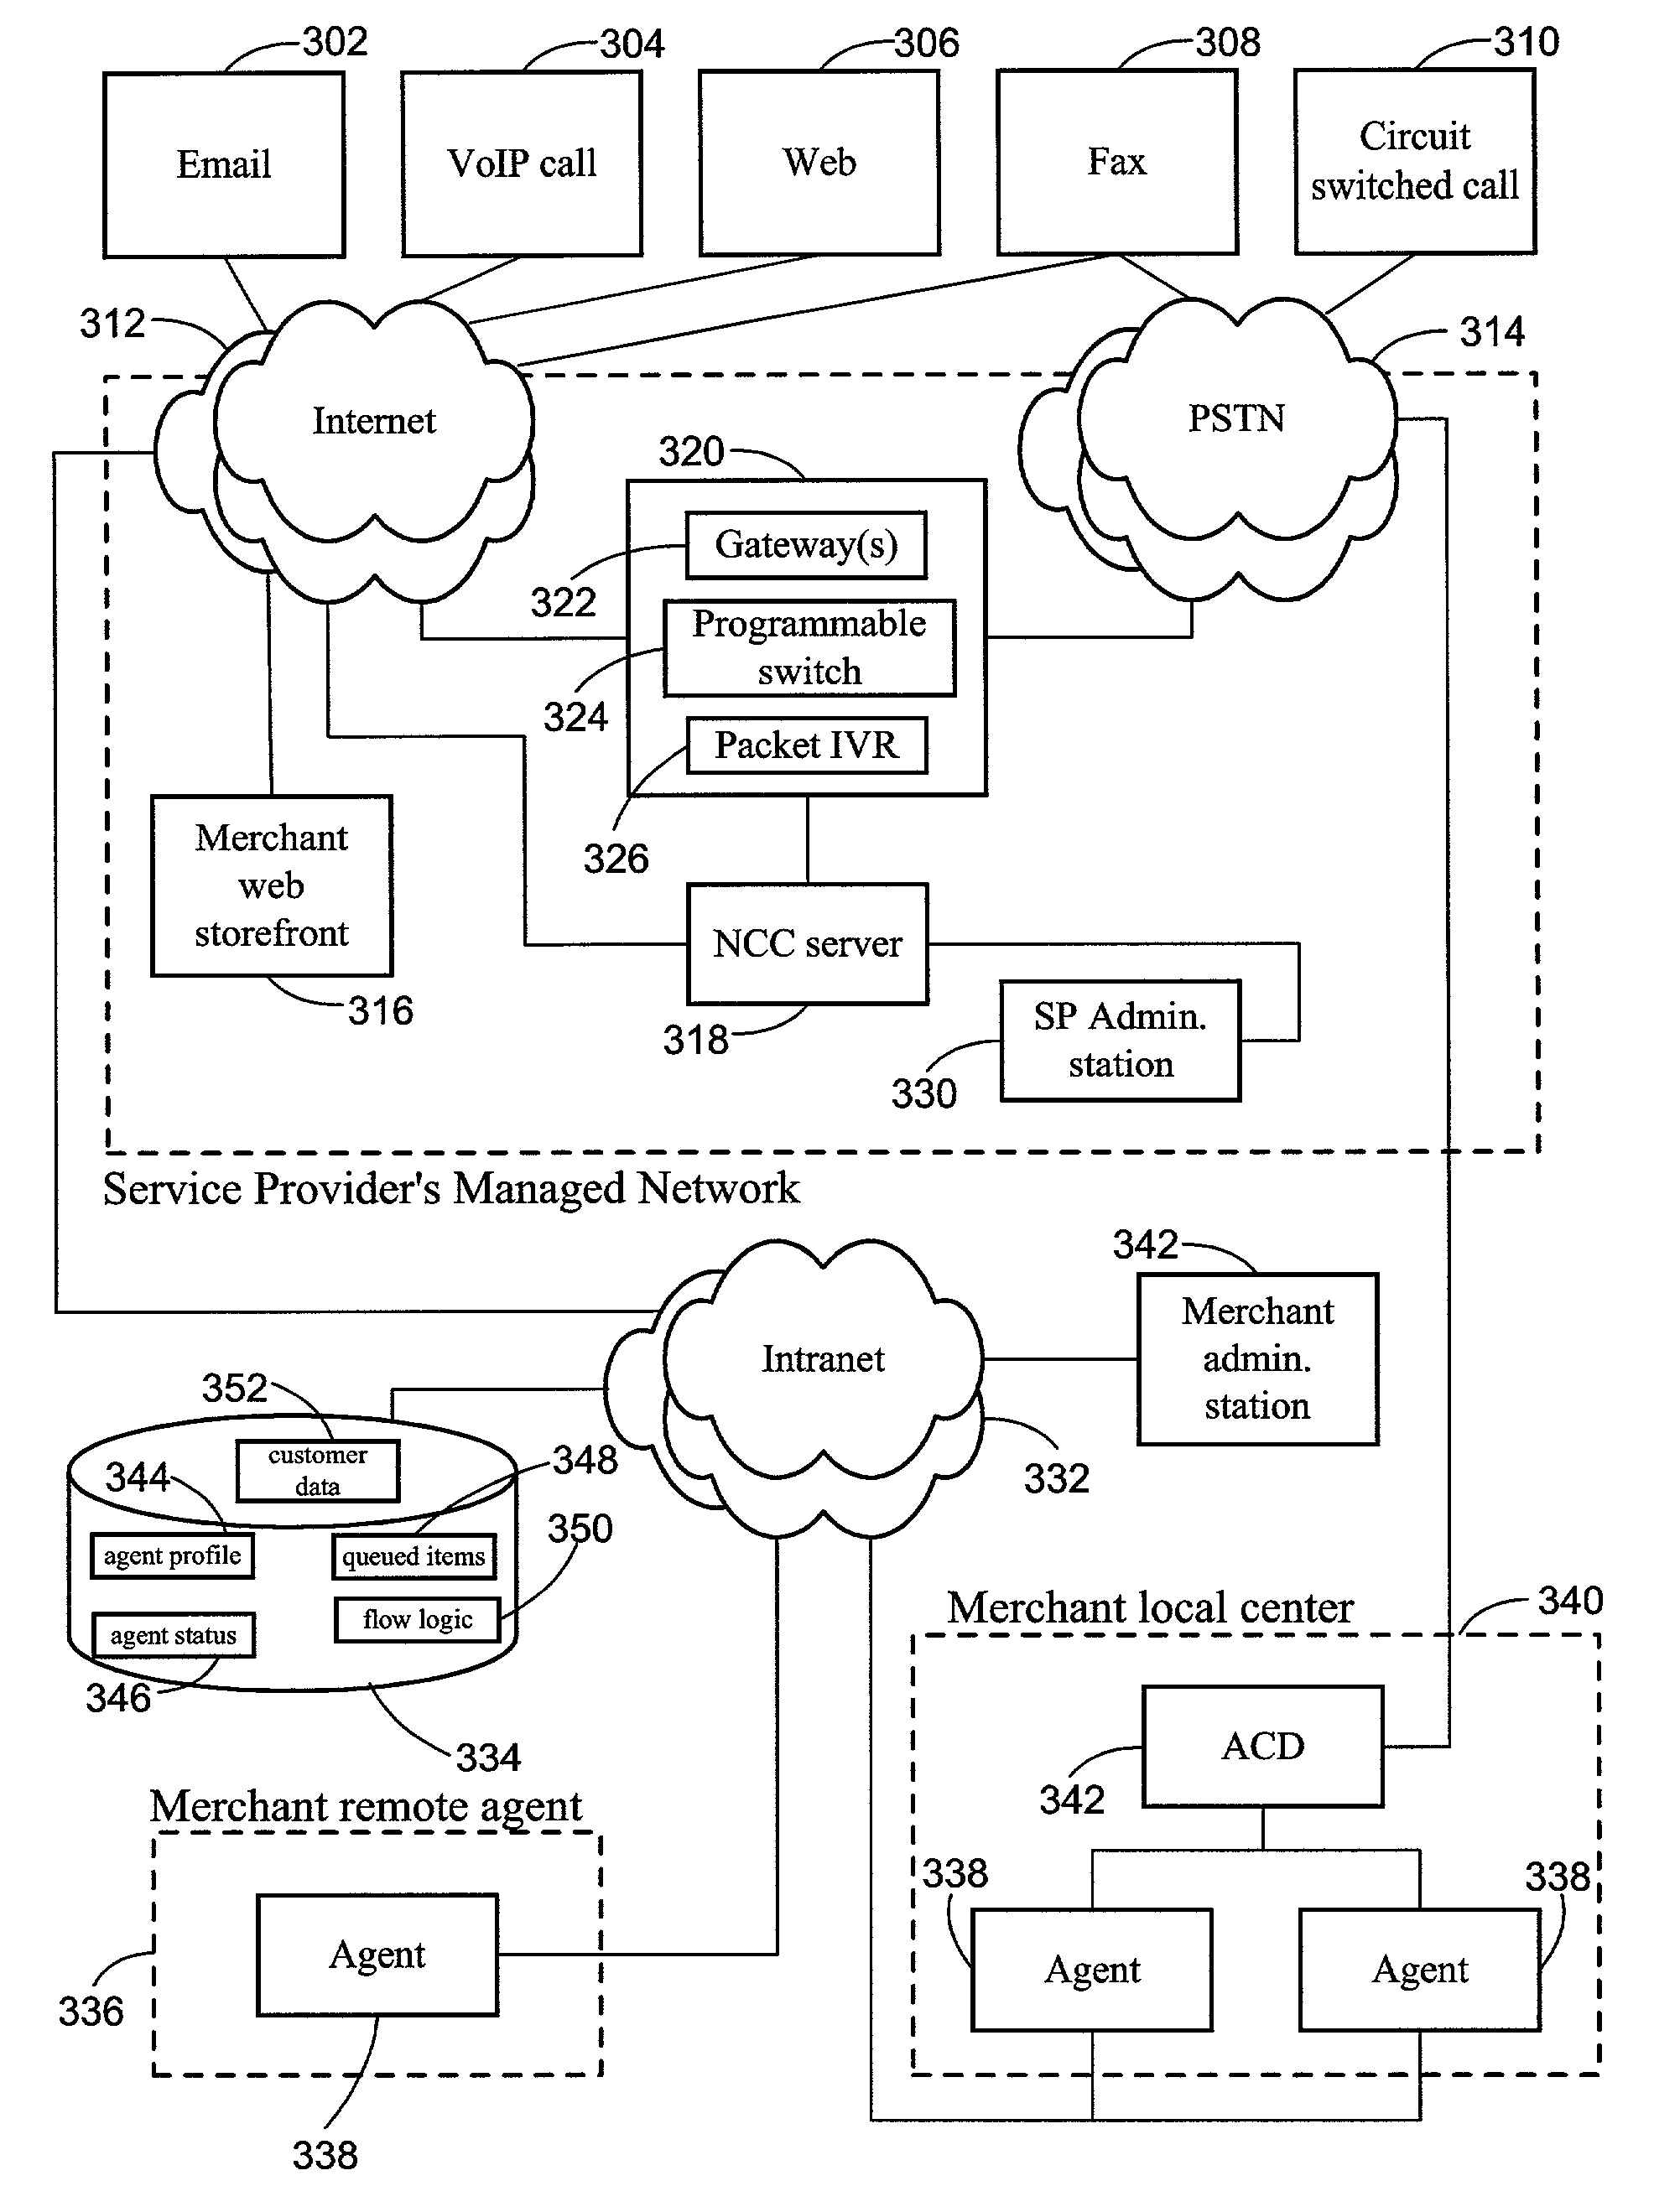 Customer relationship management system with network contact center server configured to control automated web and voice dialogues